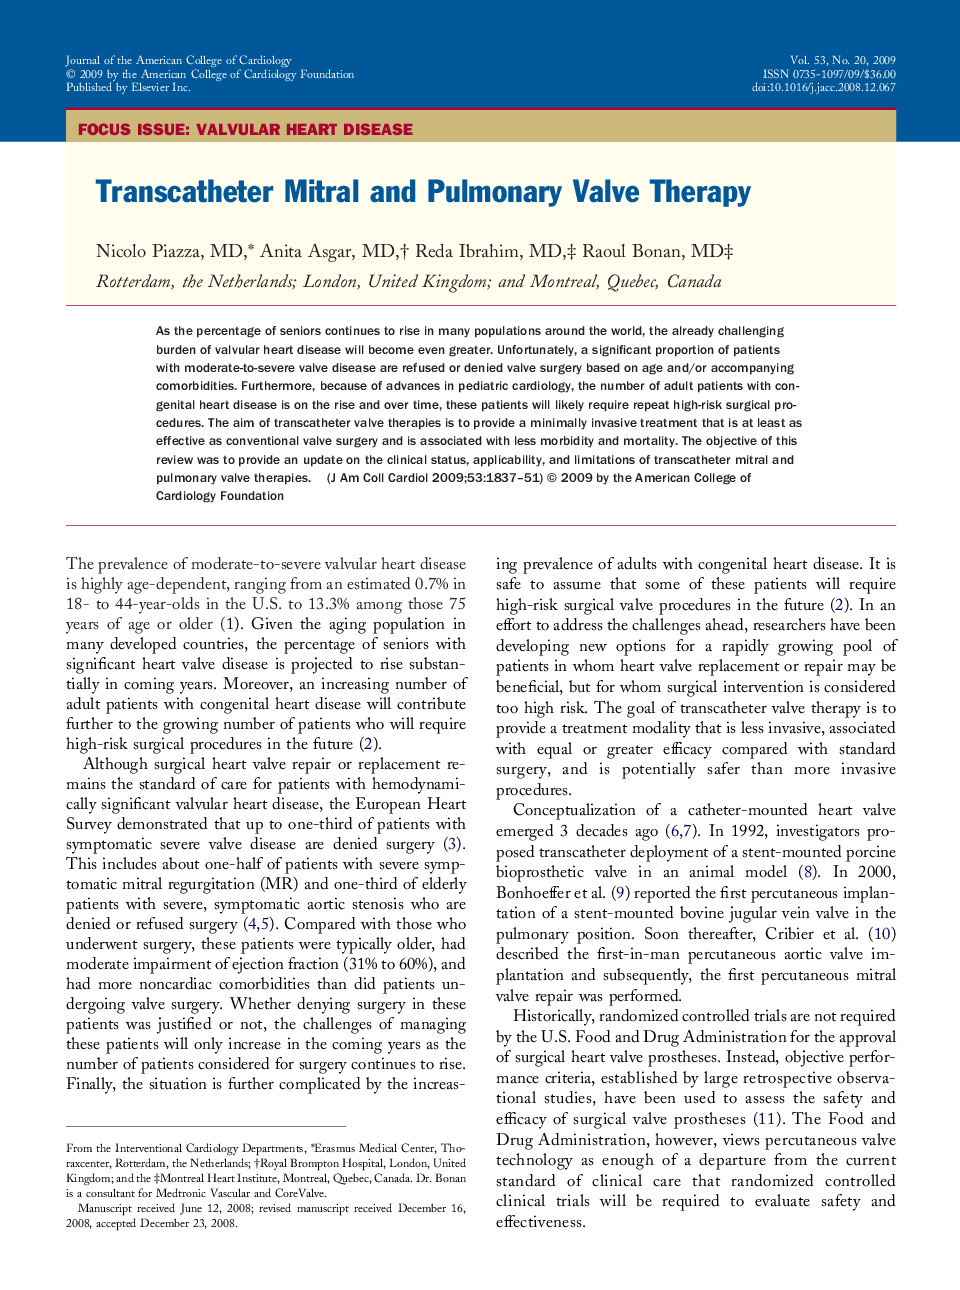 Transcatheter Mitral and Pulmonary Valve Therapy 